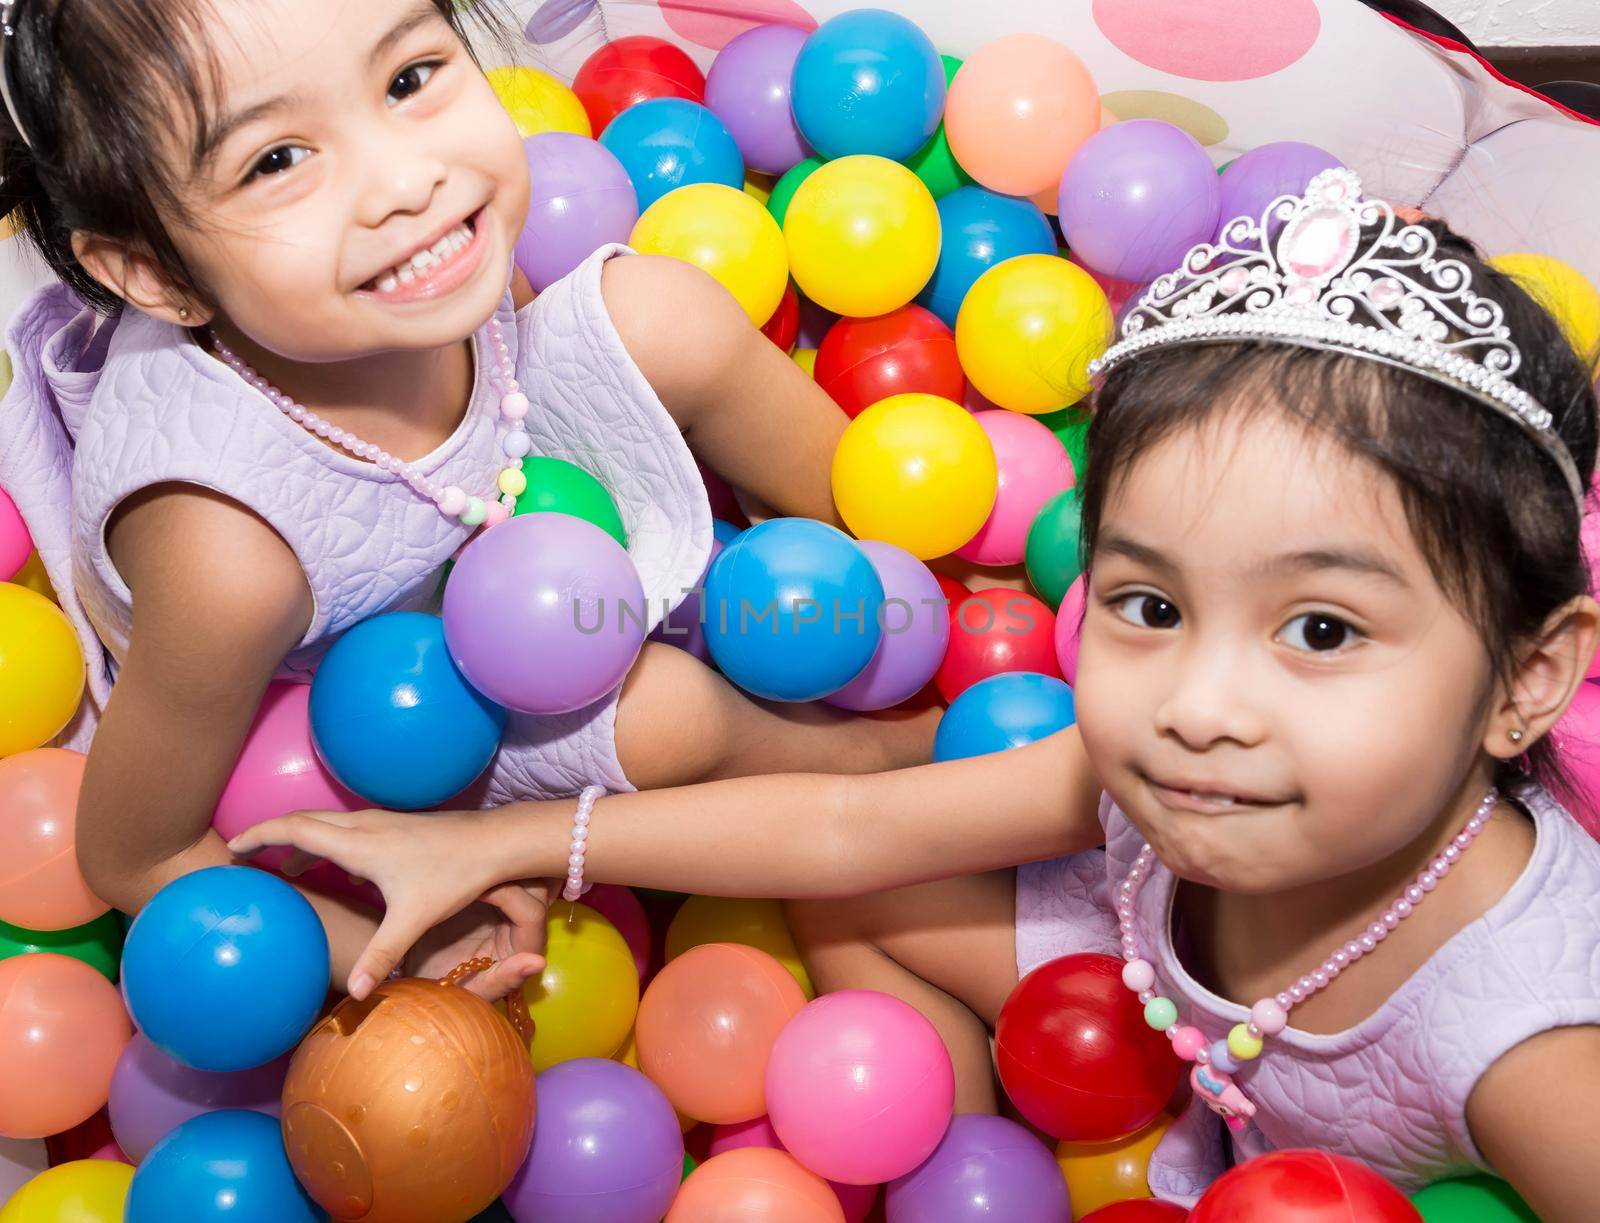 Female asian identical twins sitting on chair with white background. Wearing purple dress and accessories crown. Playing colorful plastic toy balls